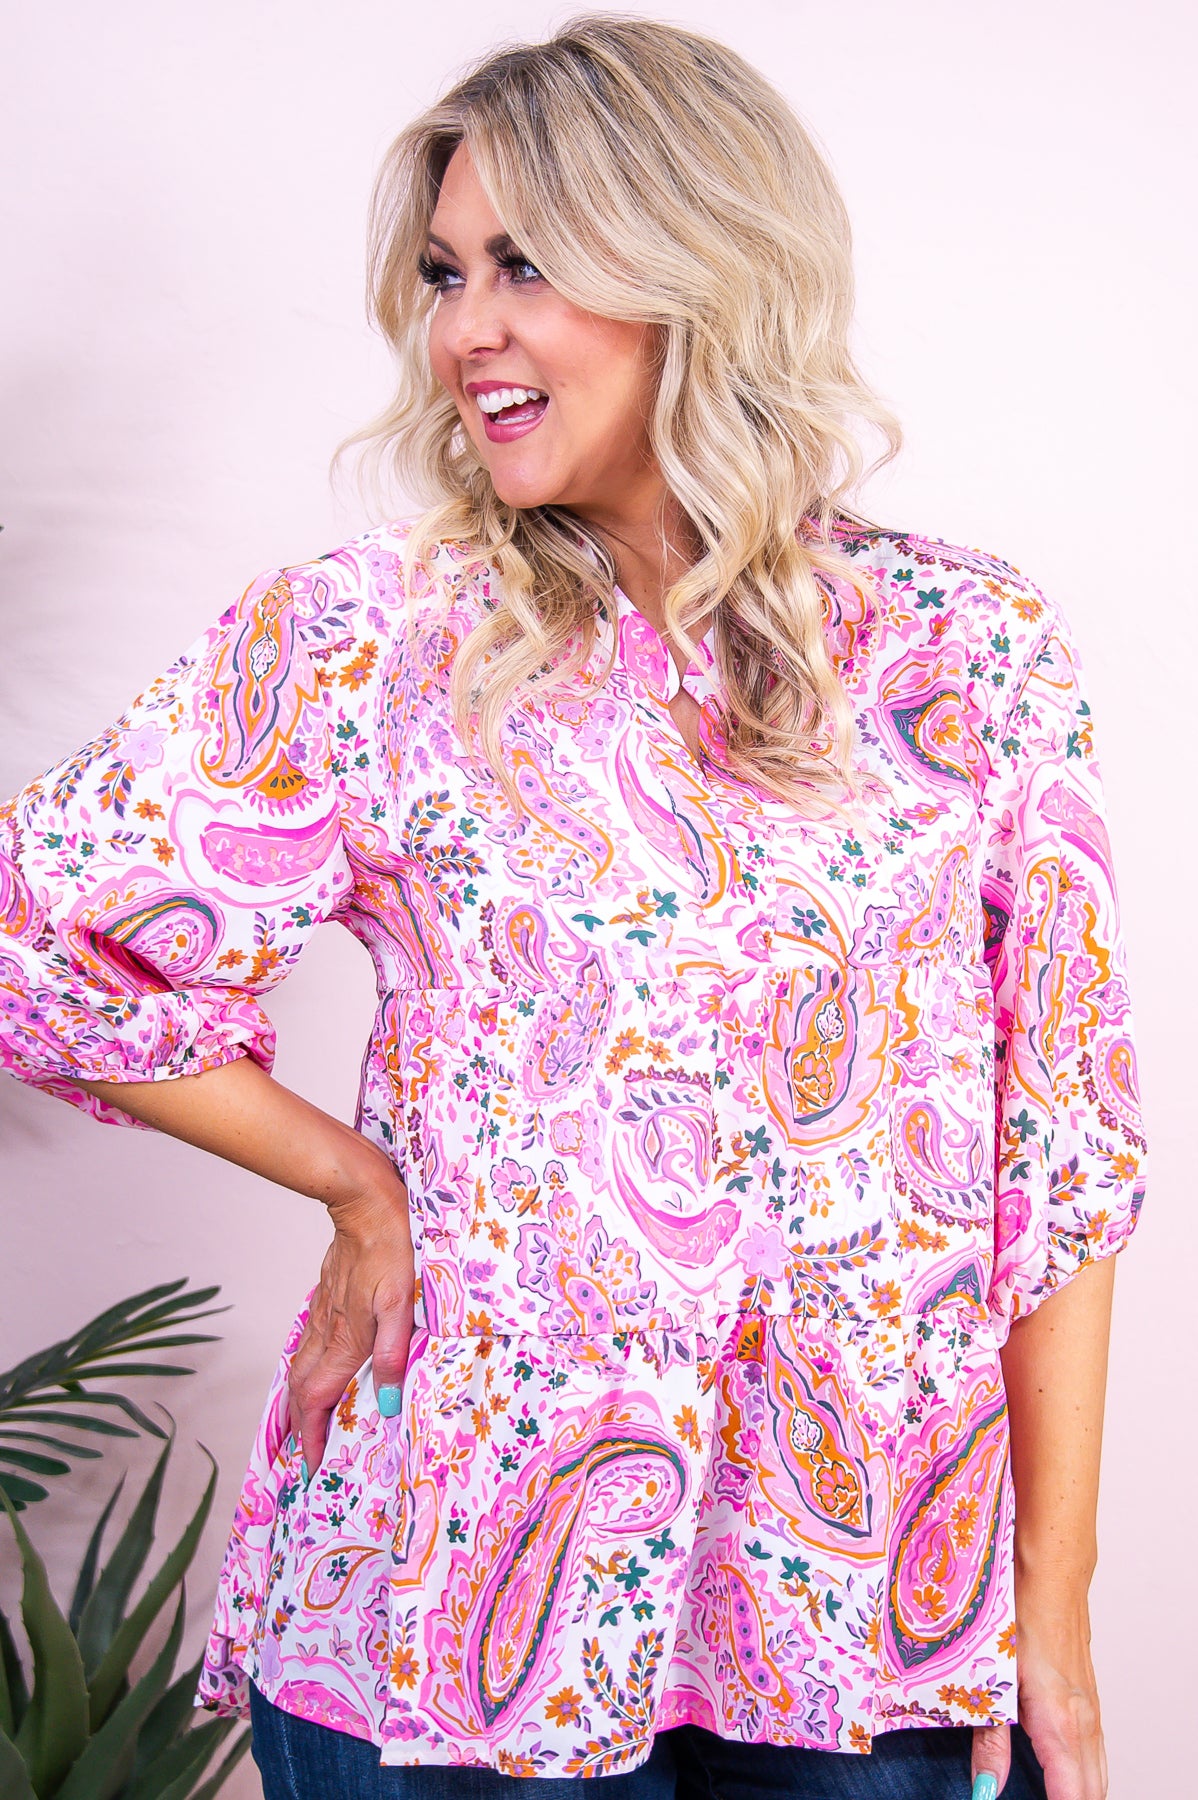 Pretty And Powerful Pink/Multi Color/Pattern Top - T9514PK